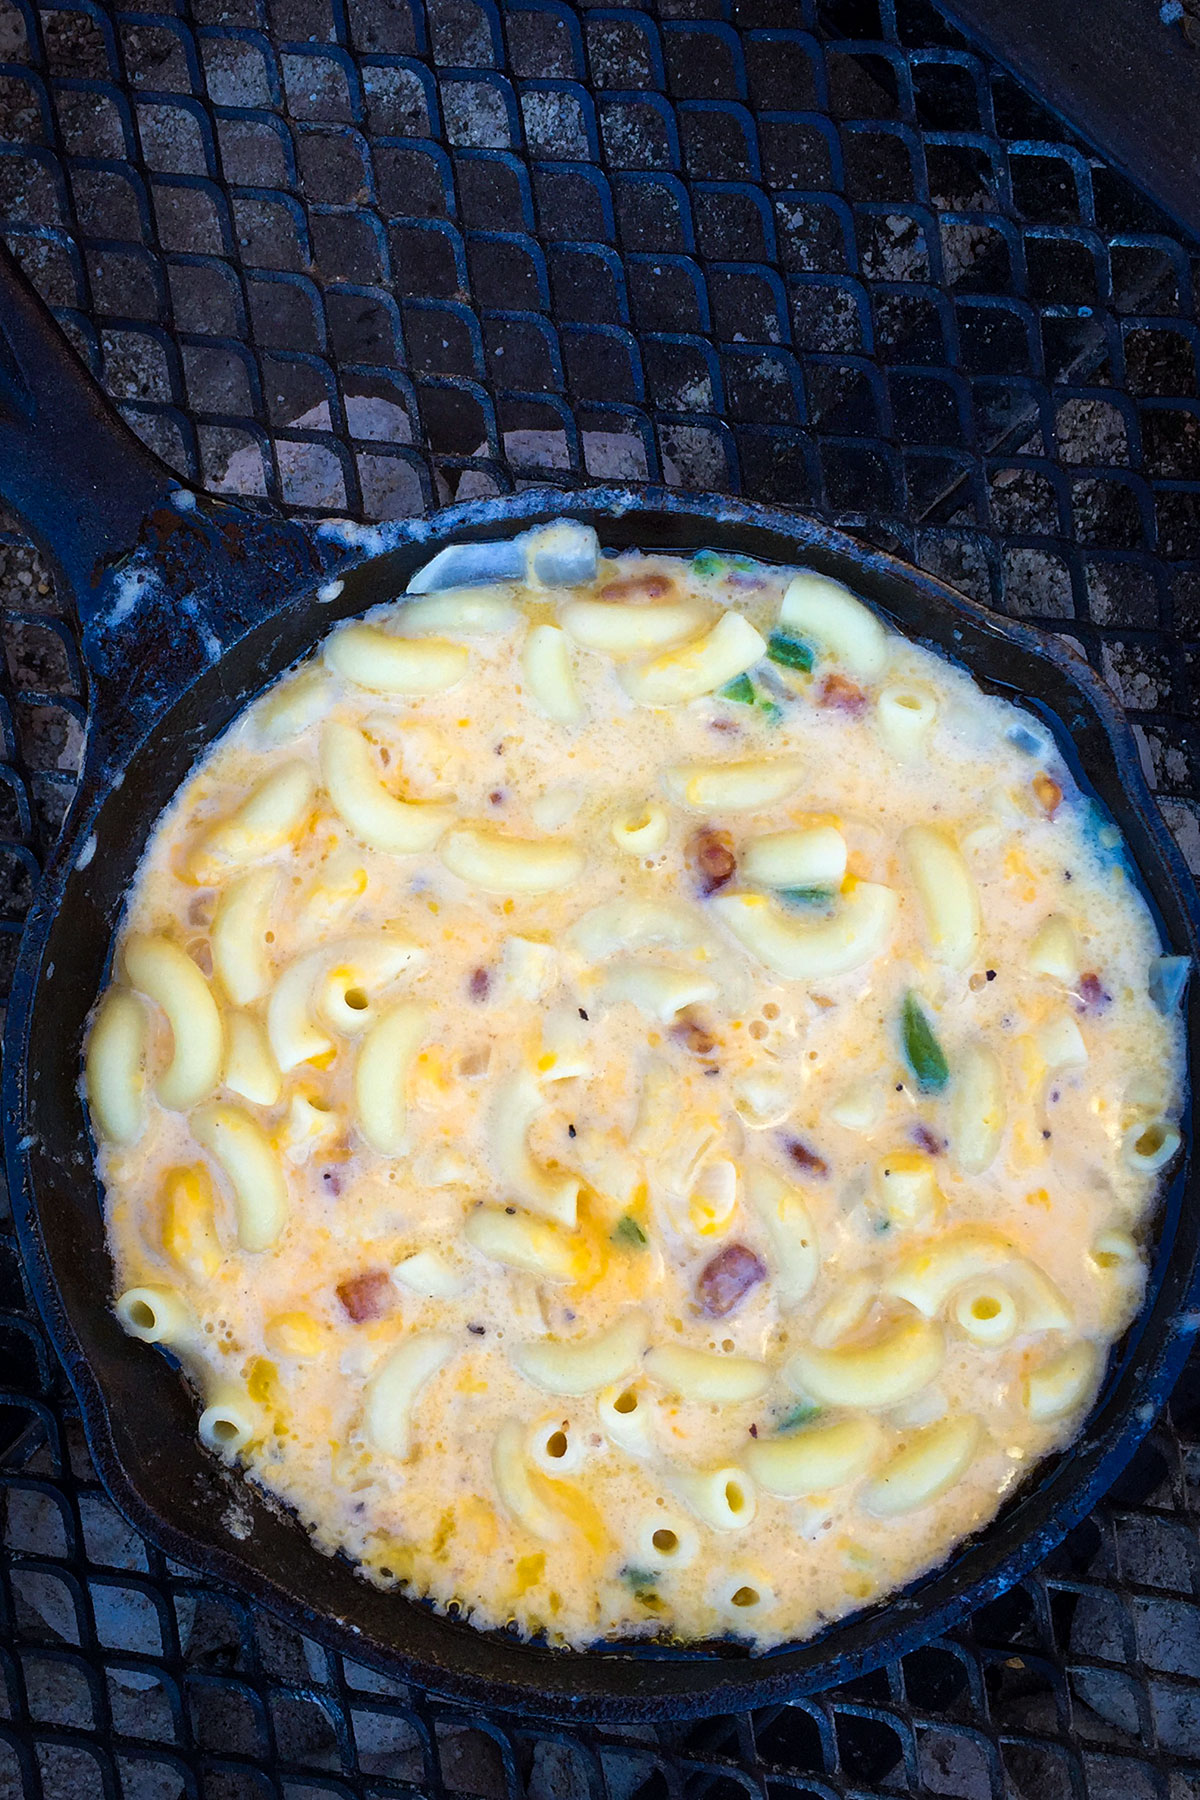 Creamy campfire skillet mac and cheese.